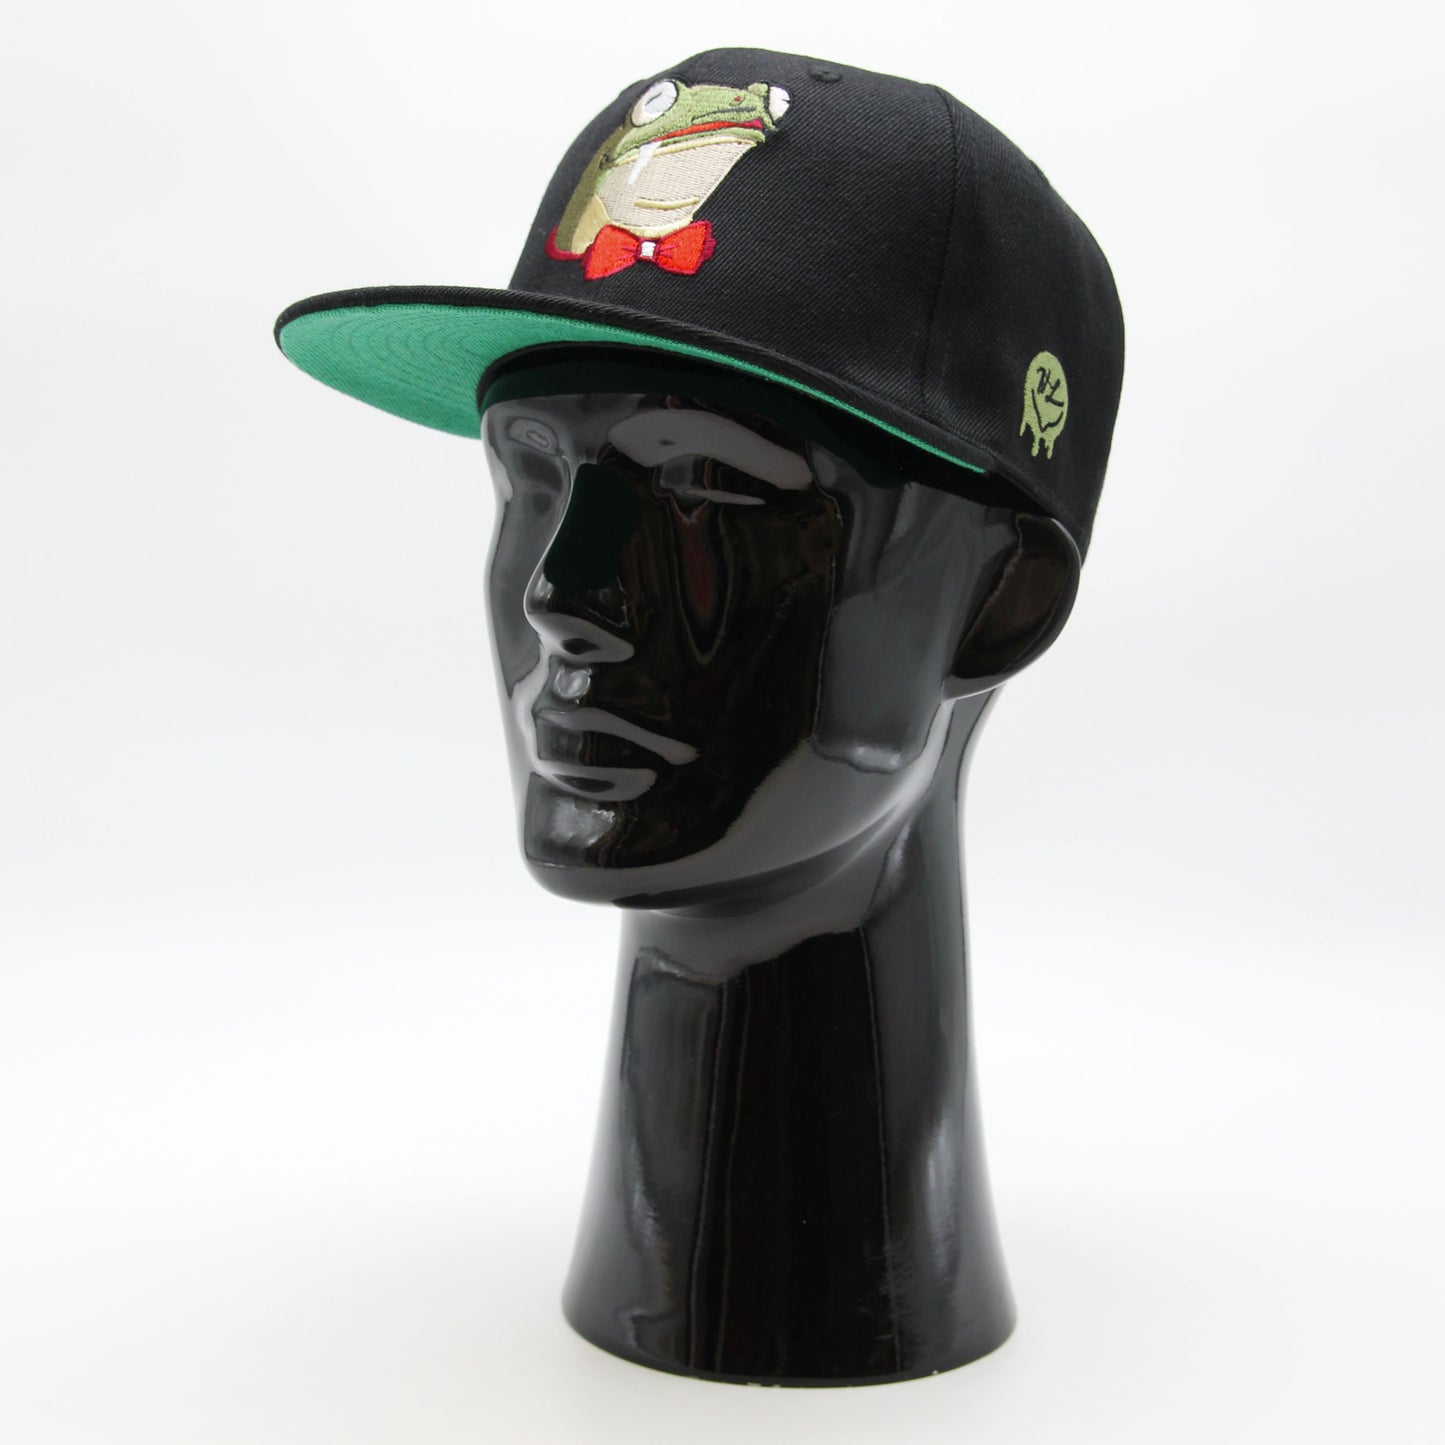 Naughty League San Diego Dirty Kermits fitted black